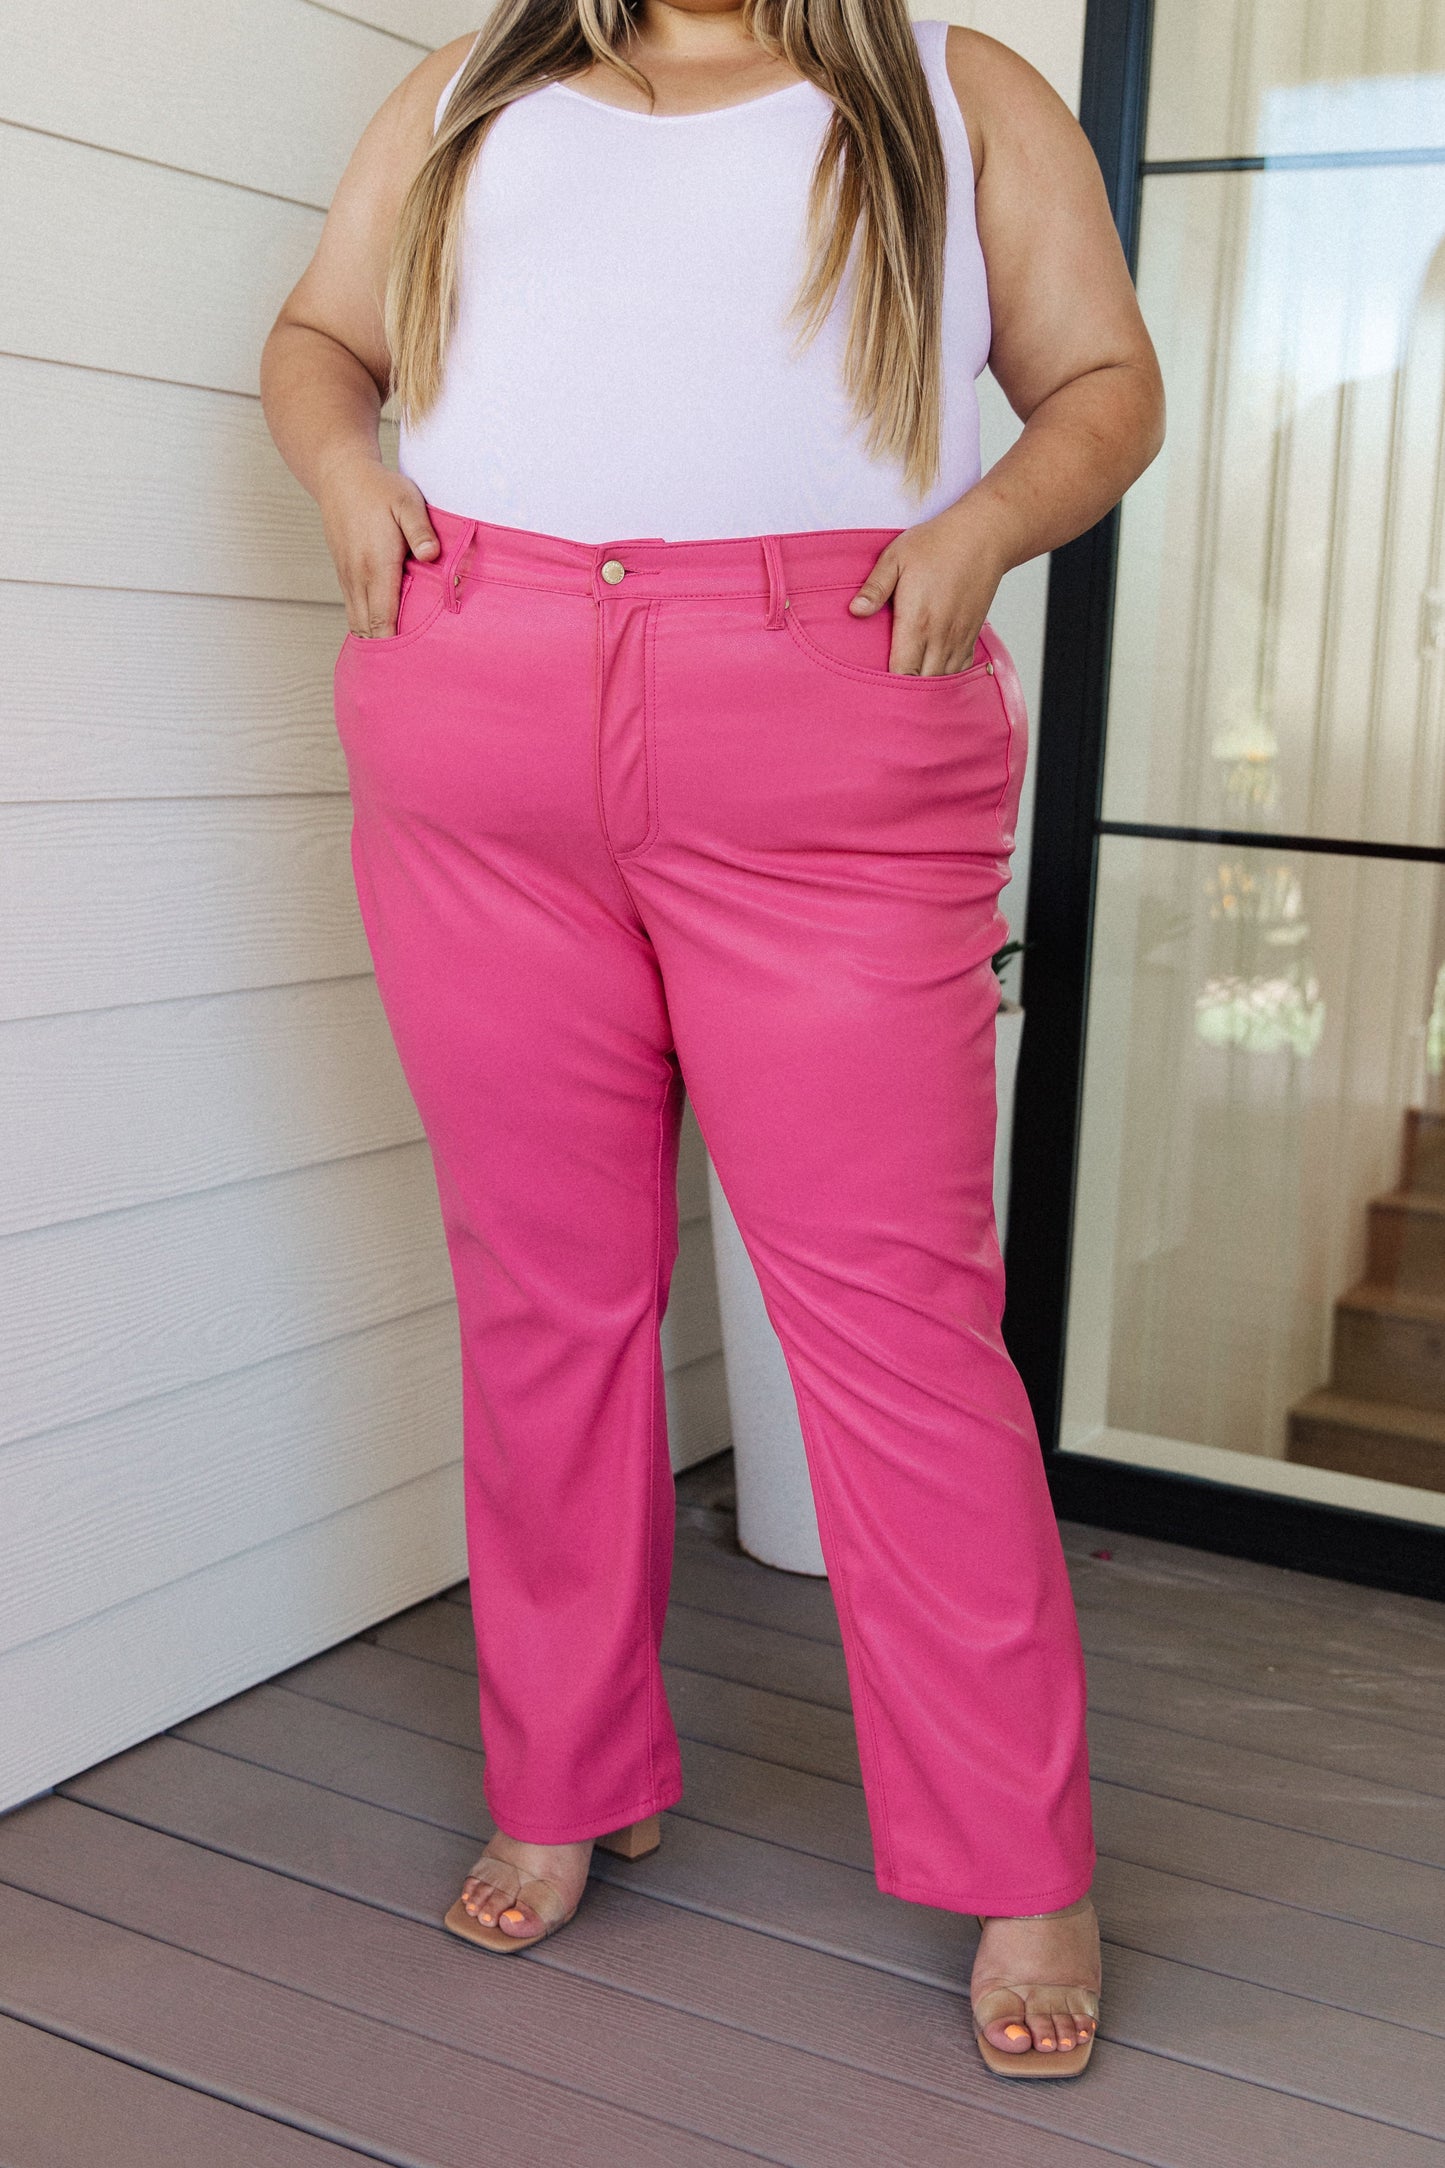 Tanya Control Top Faux Leather Pants in Hot Pink - Southern Divas Boutique